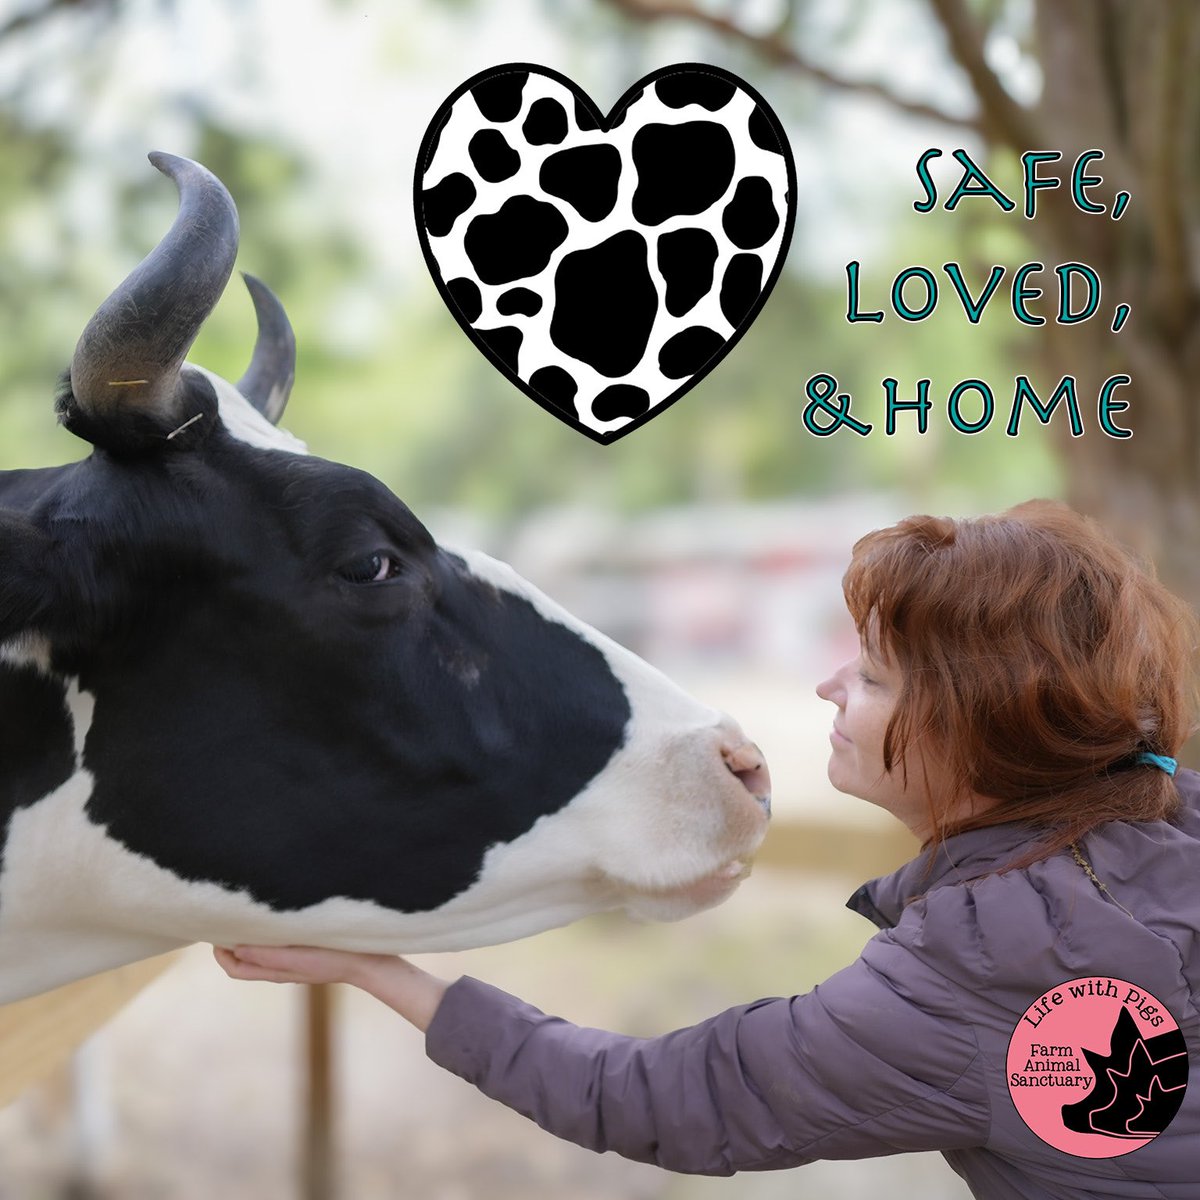 At Life With Pigs, when we say we are creating Happily Ever Afters, we truly mean that we are fostering a bond between humans and animals where they all belong to one big, loving family. And we want each and every individual to feel safe, loved, and know they are home!